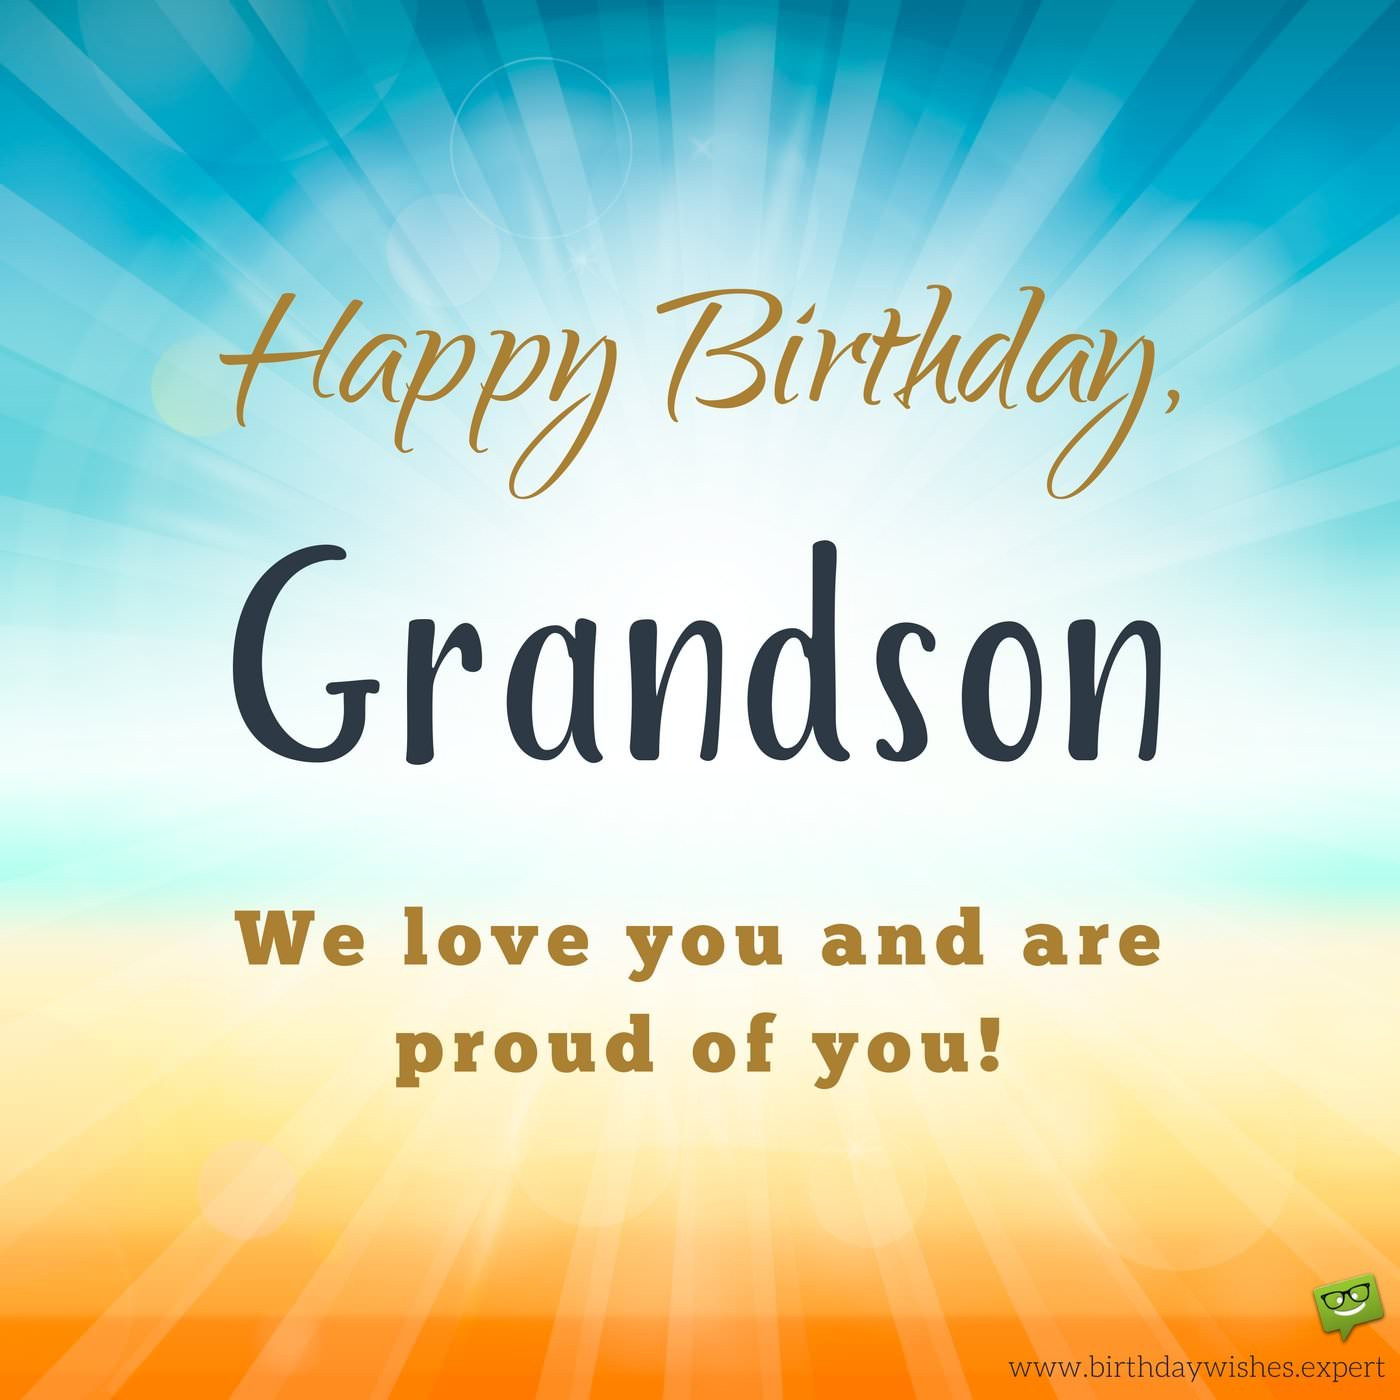 Grandson Birthday Wishes
 From your Grandma & Grandpa Birthday Wishes for my Grandson